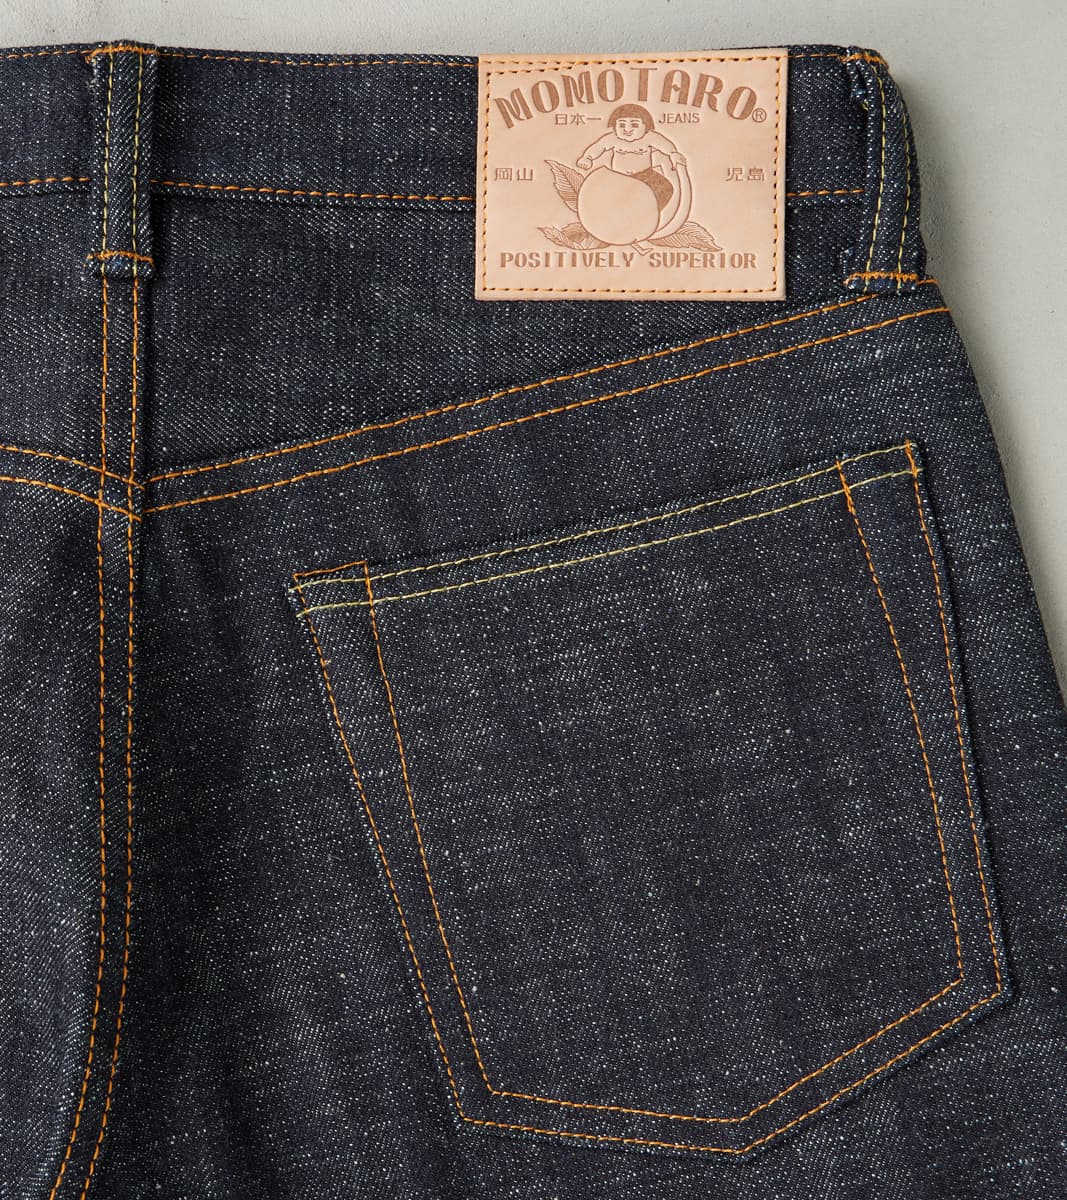 Momotaro Jeans - 0605-82 - Natural Tapered - 16oz US Revival Cotton ...